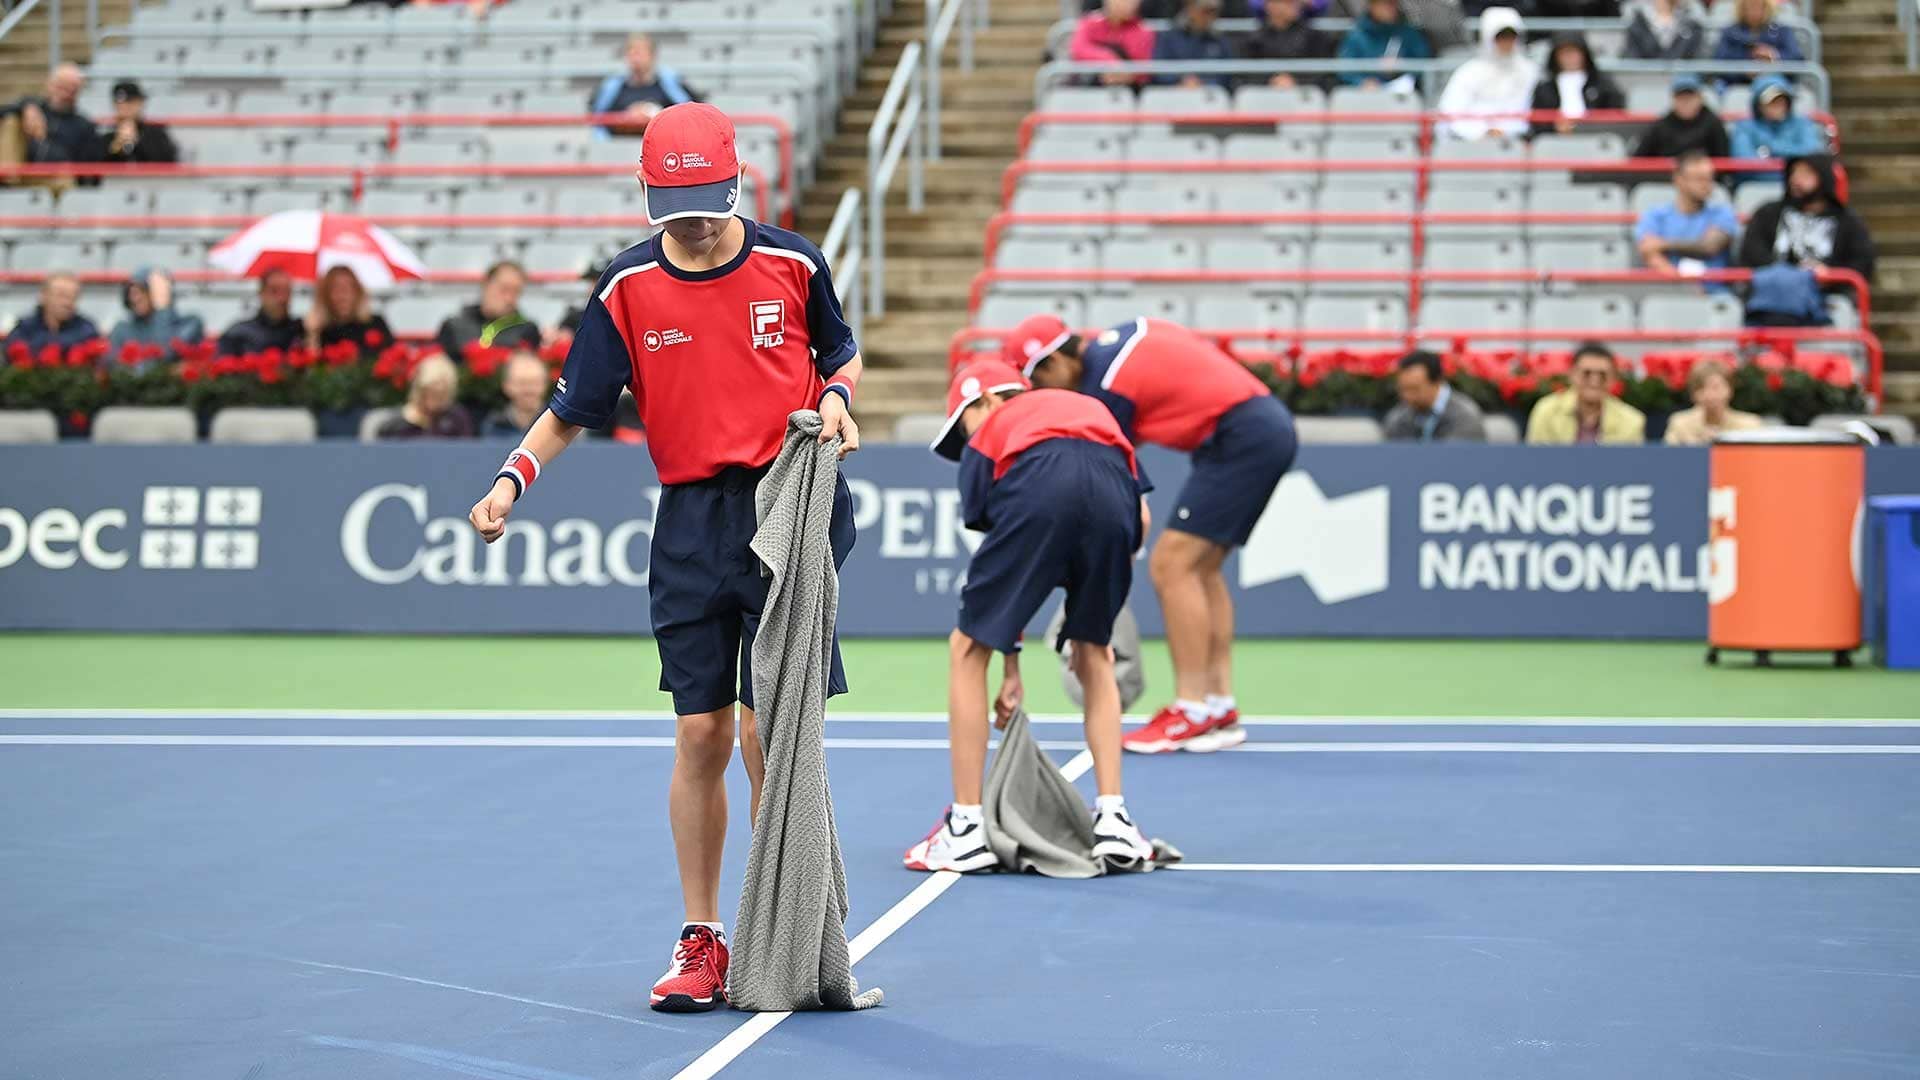 Play Begins In Montreal After Rain ATP Tour Tennis